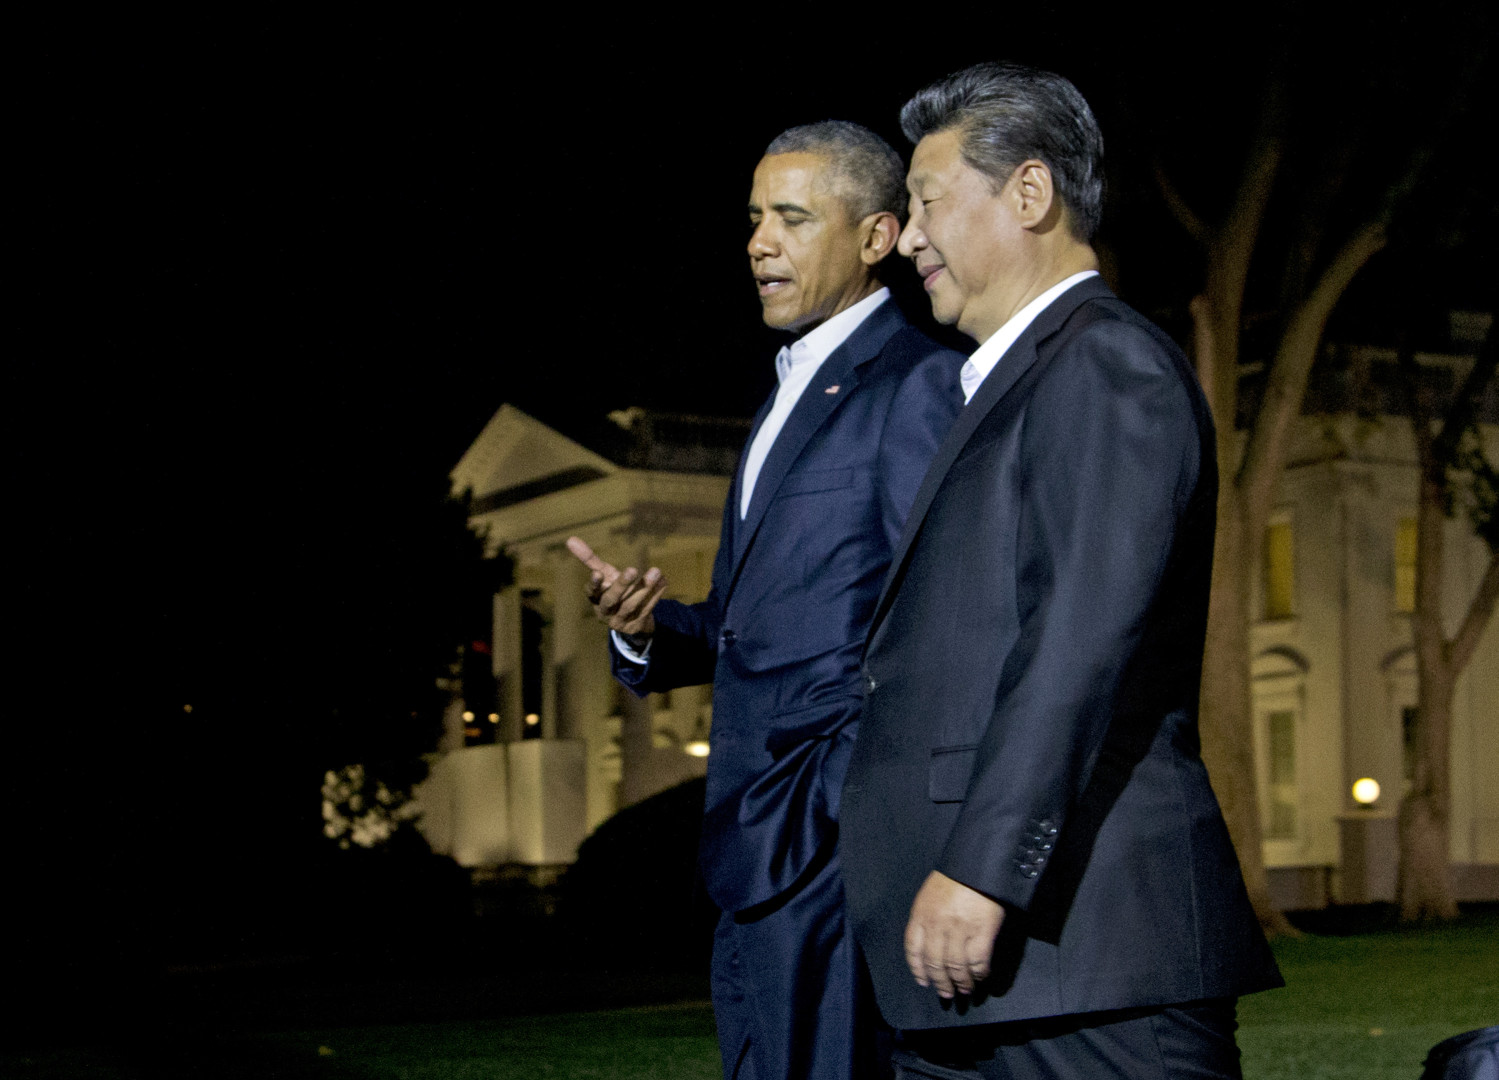 President Barack Obama and Chinese President Xi Jinping, right, walk on the North Lawn of the White House in Washington, Thursday, Sept. 24, 2015, for a private dinner at the Blair House, across the street from the White House. Xi arrived in Washington late Thursday for a State Visit. Obama has invested more time building personal ties with the Chinese president than with most other world leaders. (AP Photo/Manuel Balce Ceneta)